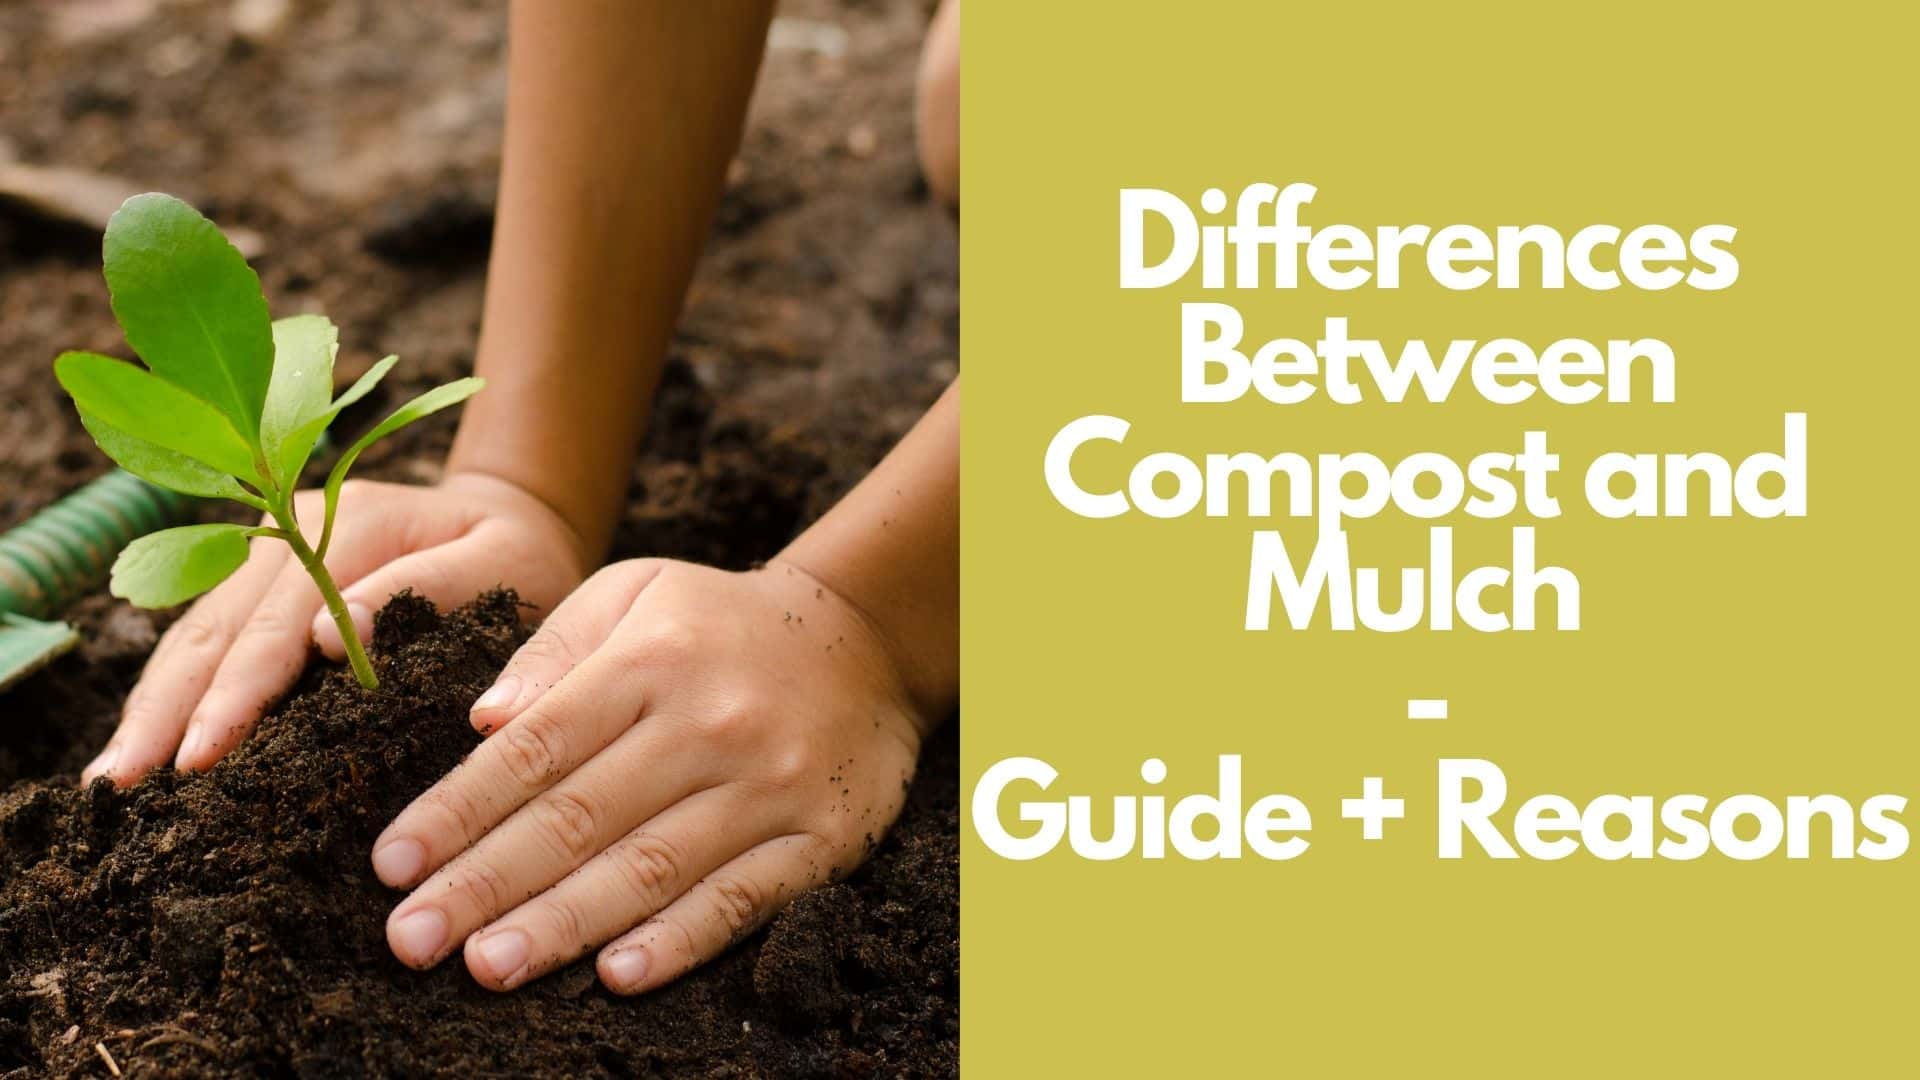 Differences Between Compost and Mulch | Guide + Reasons